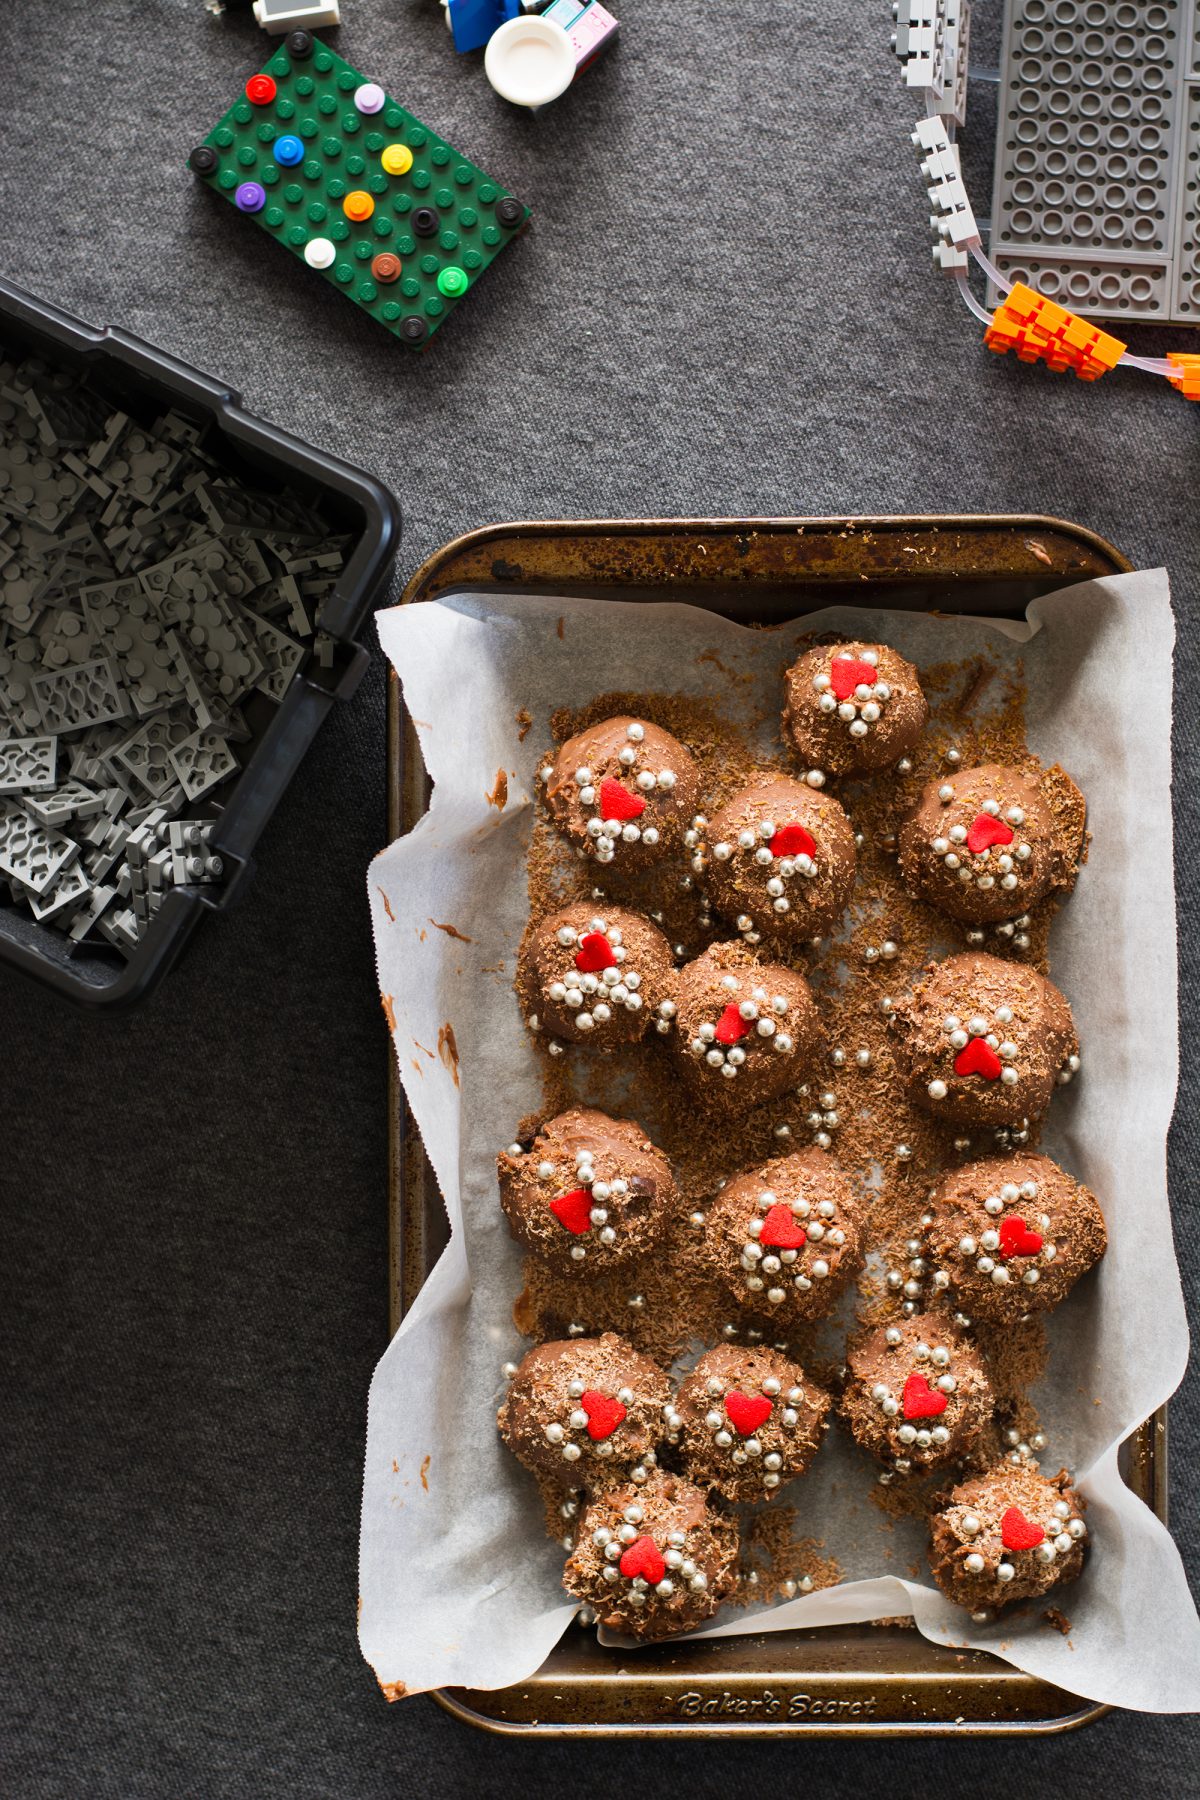 Flex it with Flexo + a Recipe for Chocolate Tim Tam Balls (and a Giveaway too!)